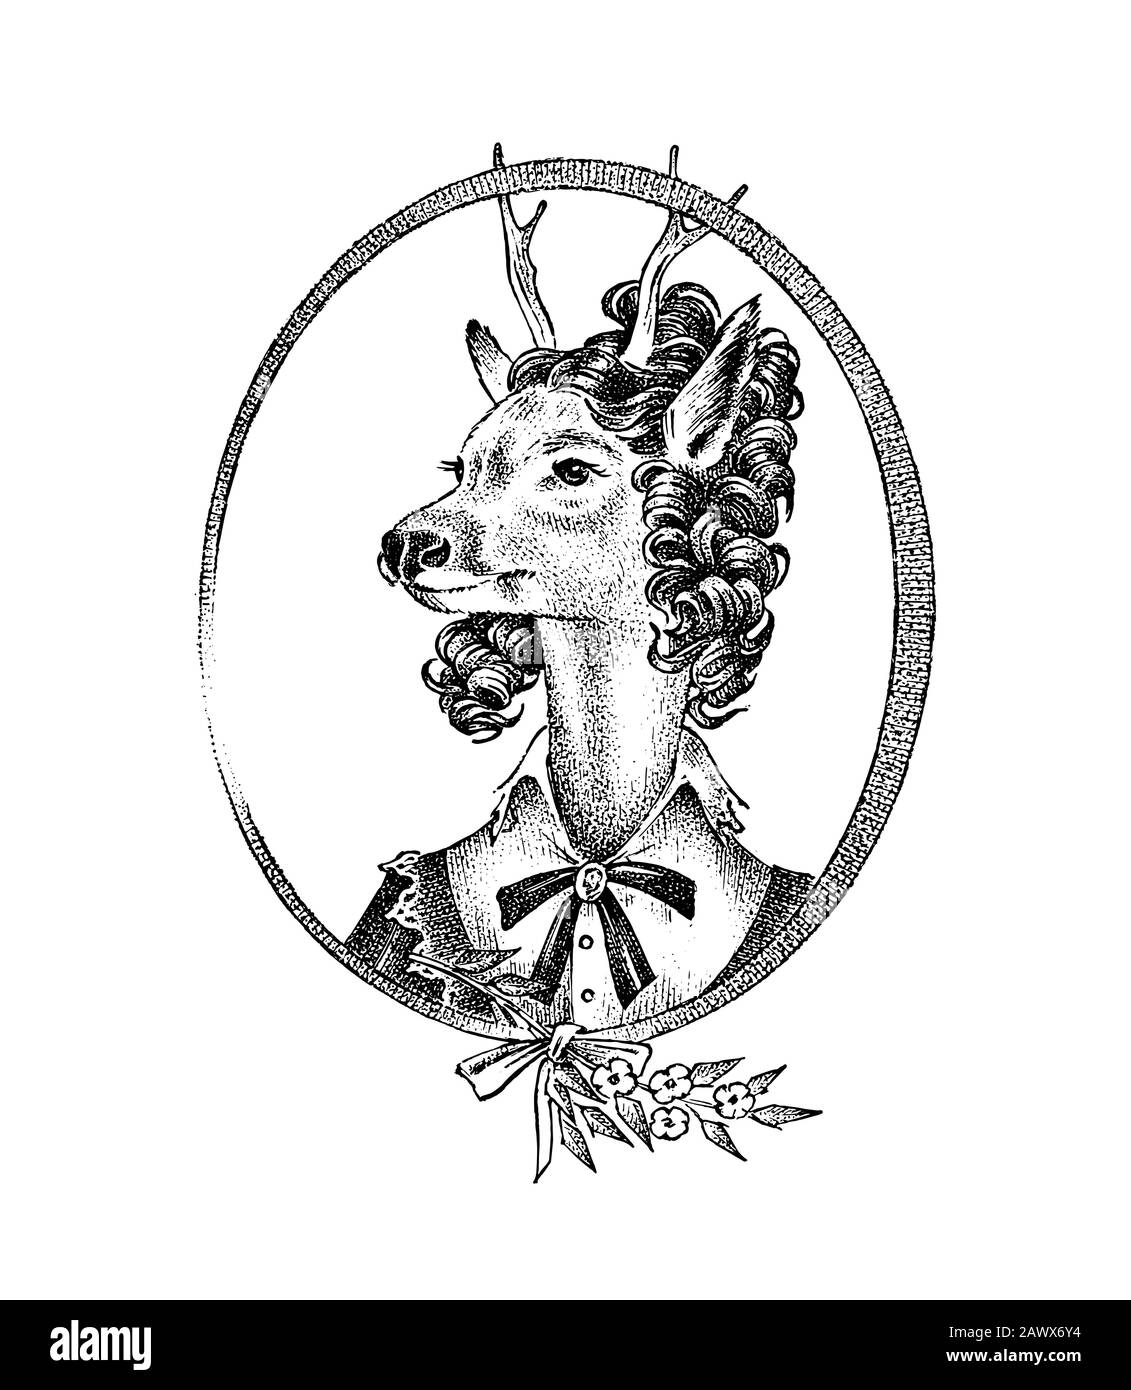 Animal character. Deer lady or doe with flowers. Hand drawn portrait. Engraved old monochrome sketch for card, label or tattoo. Anthropomorphism in Stock Vector